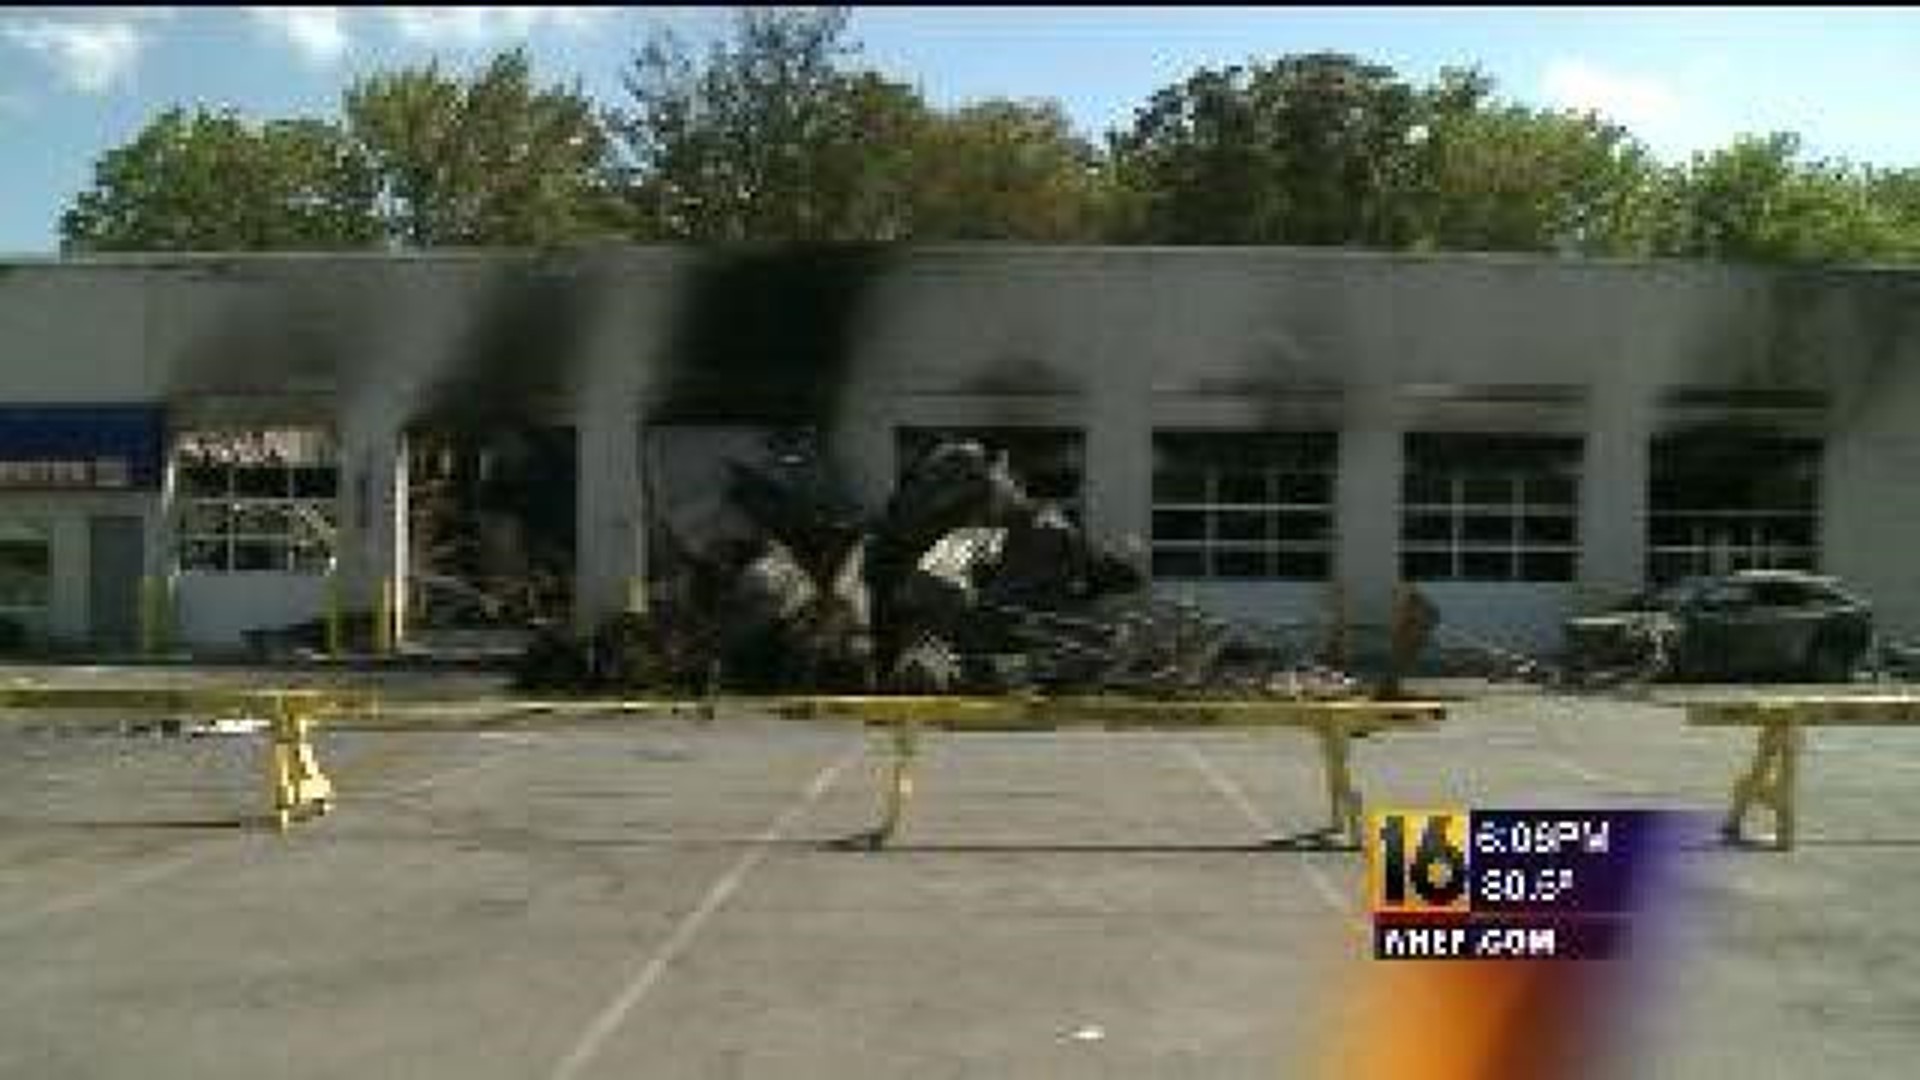 Customer Loses Car in Fire at Auto Shop